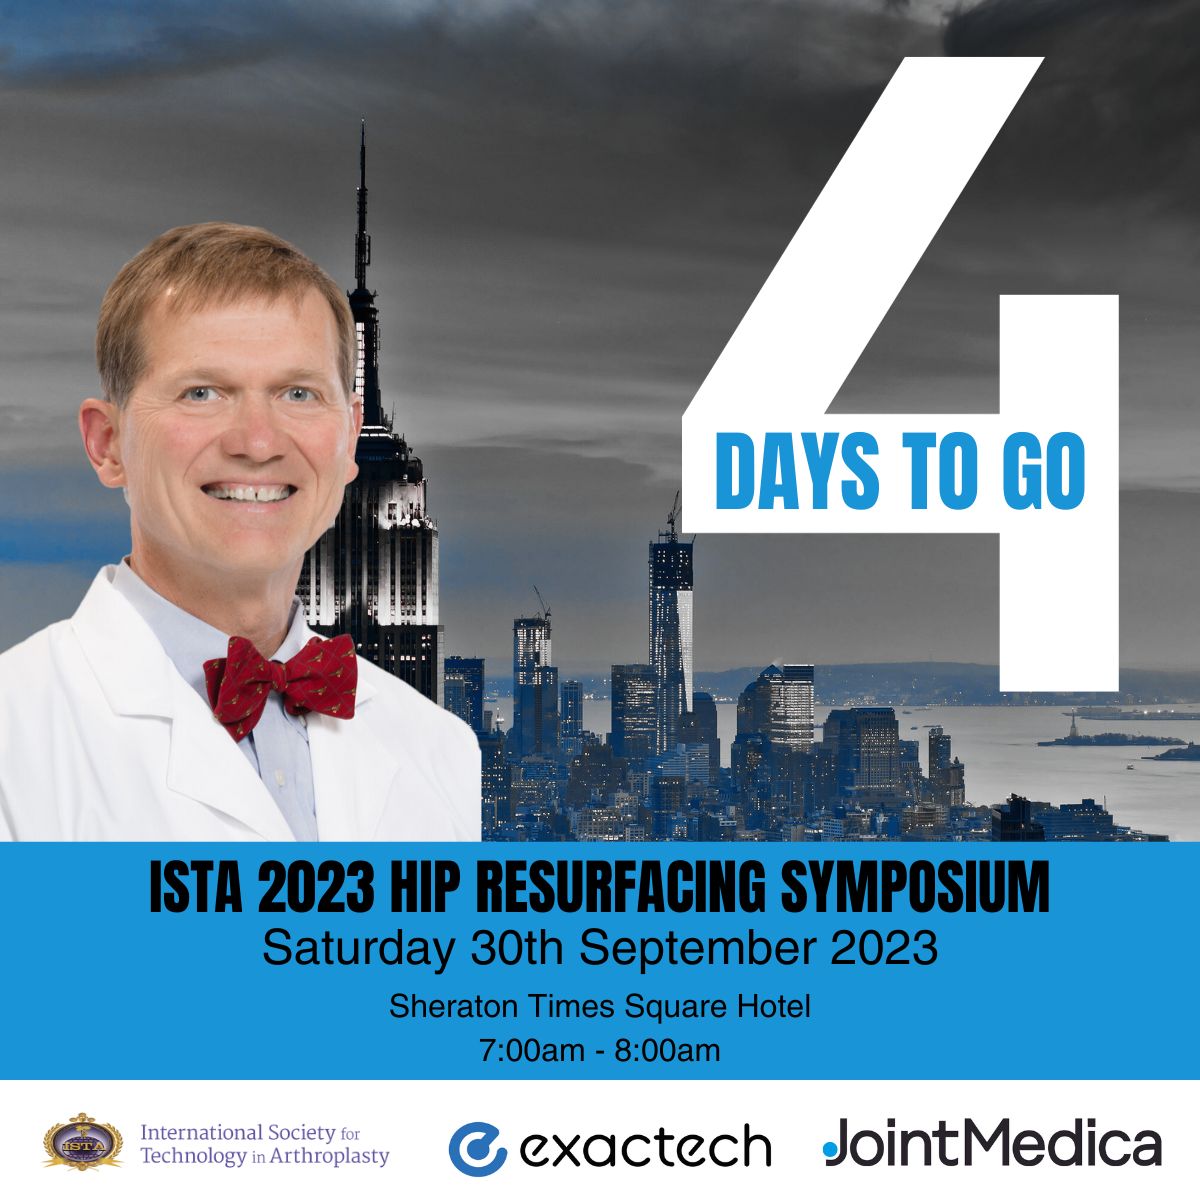 The countdown continues... just 4 days to go! Have breakfast with the likes of Dr. Thomas Gross and learn more about why Hip Resurfacing is poised to make a comeback. 🦿

Find out more here➡️: lnkd.in/eU63ePjM

#ISTA2023 #Hipresurfacing #hipspecialist #hiparthoplasty